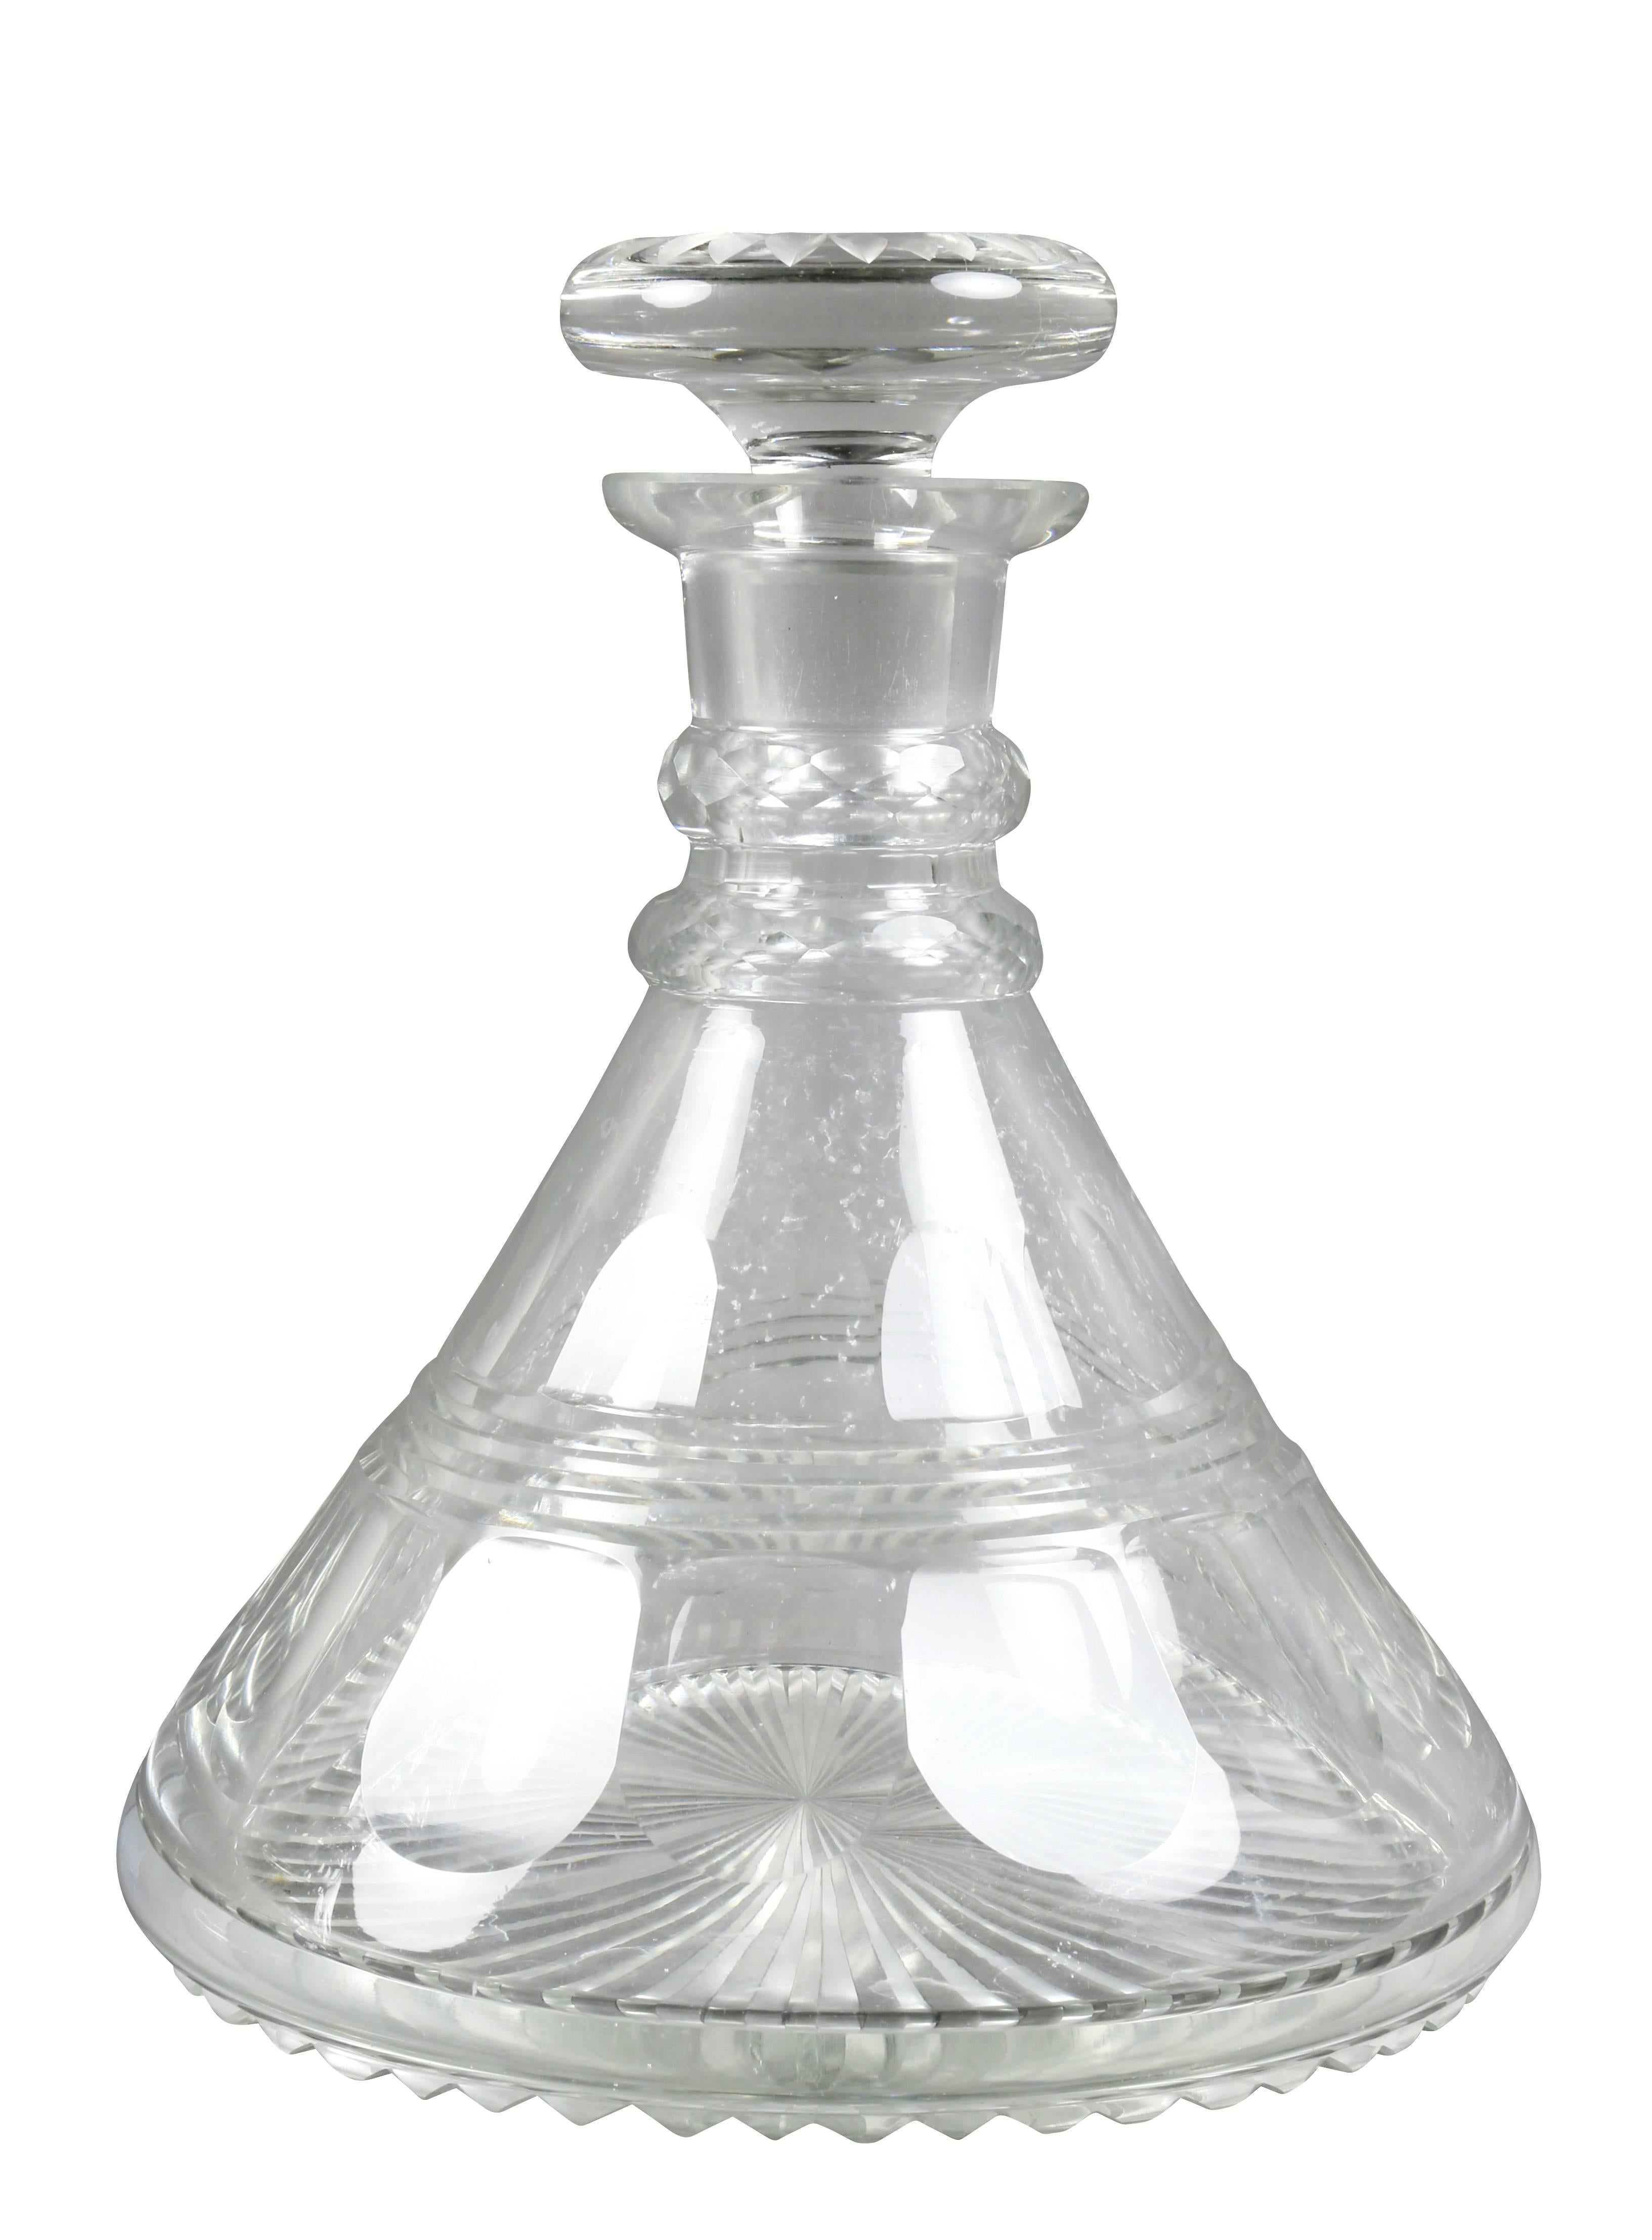 Each with a conical shape with stoppers. Anglo Irish style cut-glass.